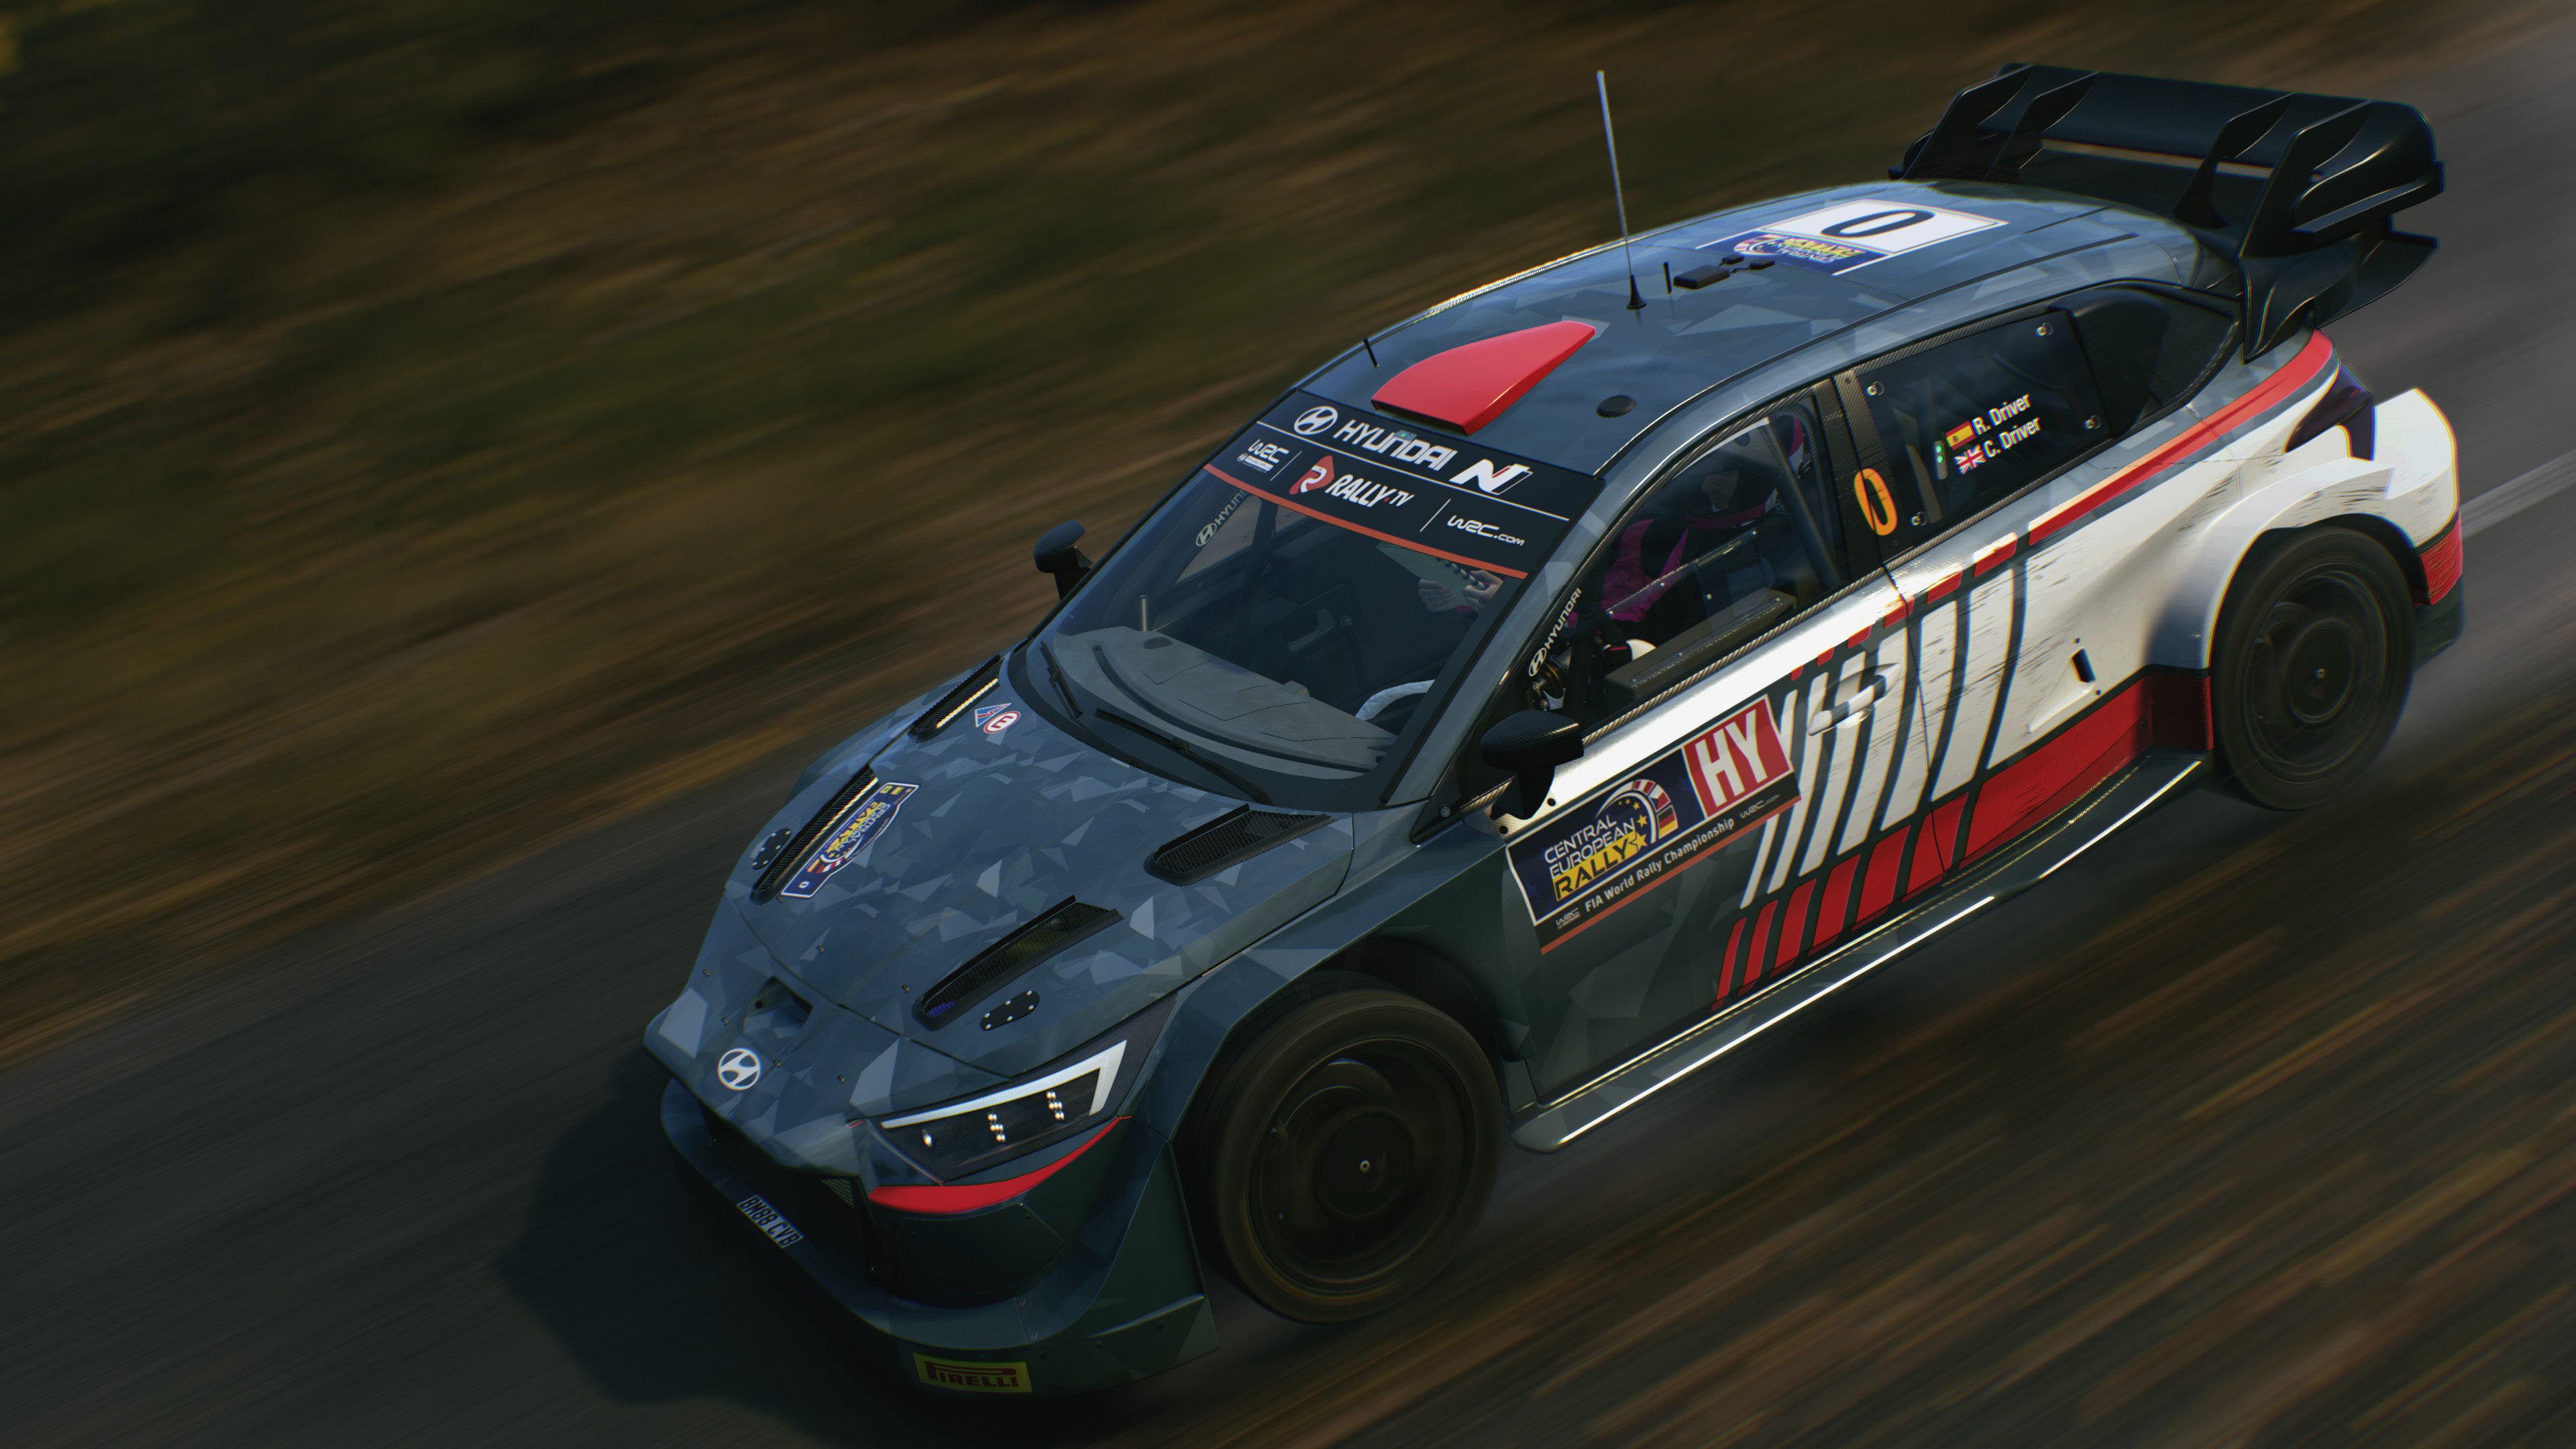 Anhoch PC Market Online - Game PS5 - EA Sports: WRC